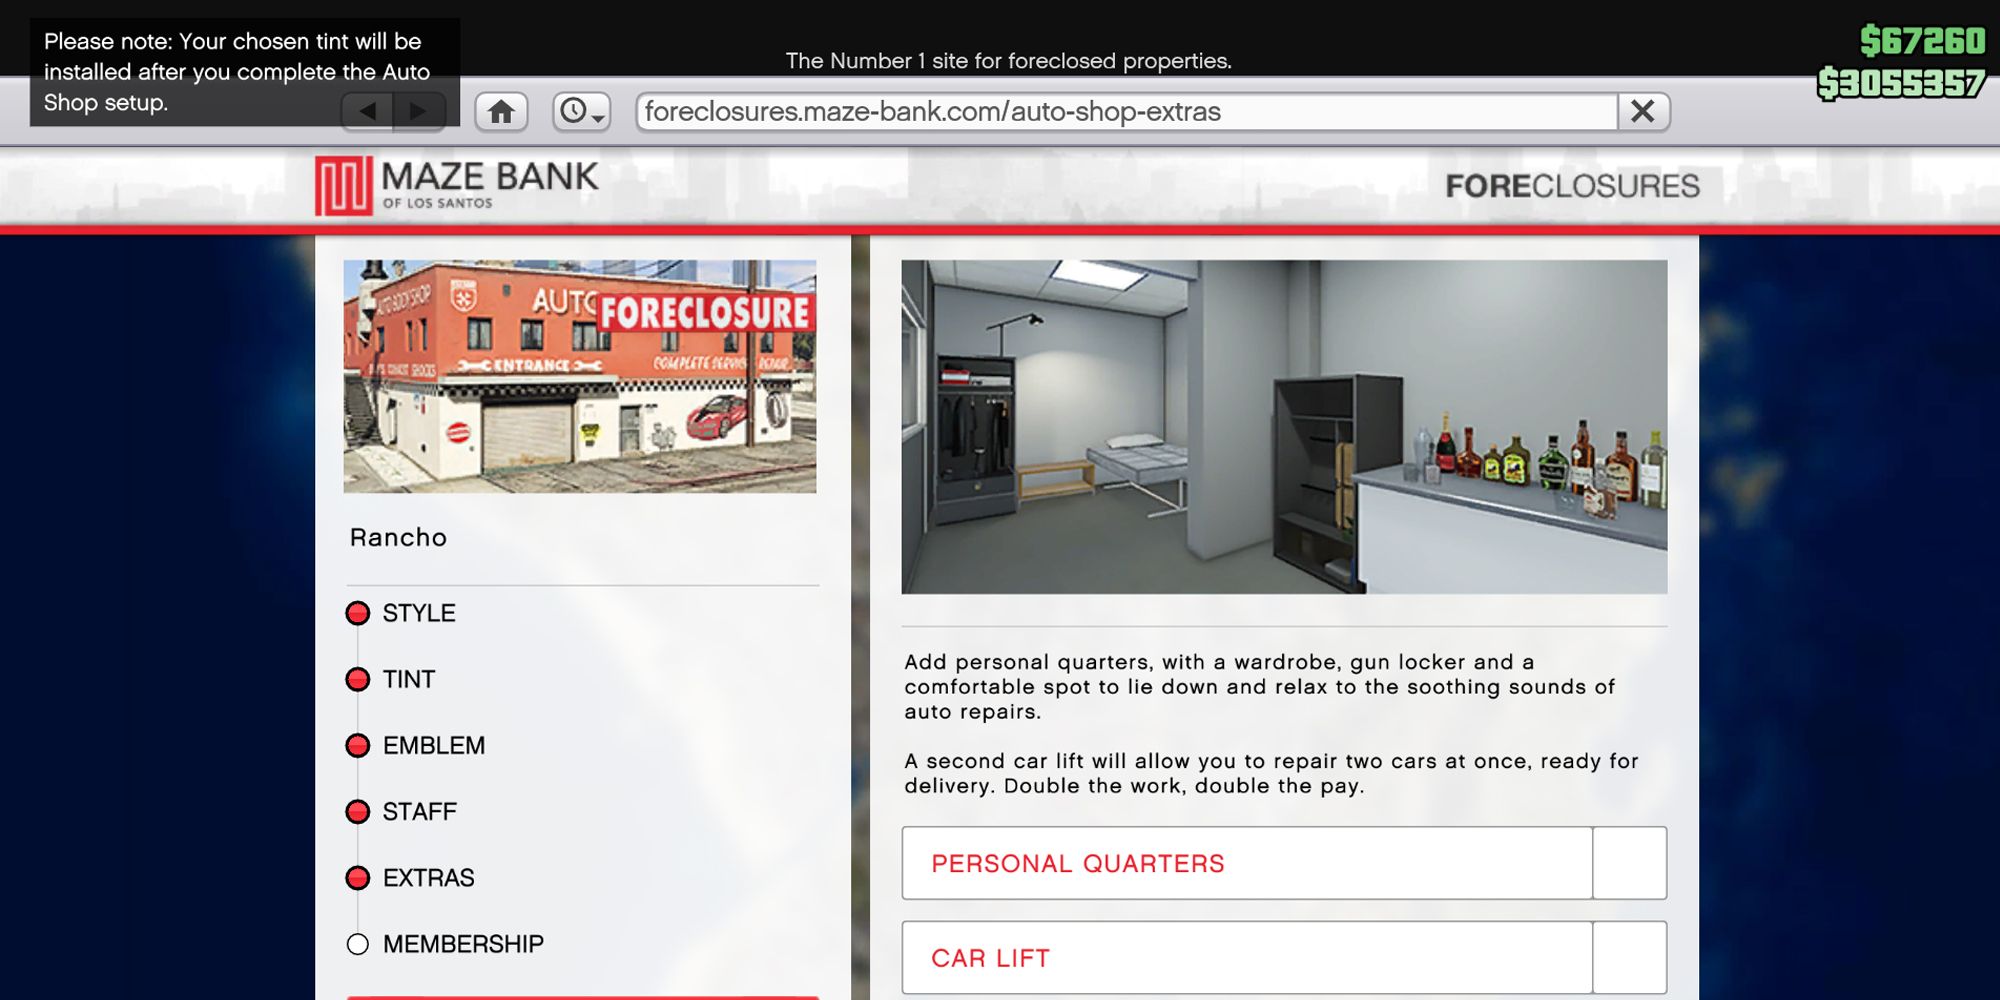 Image depicts the Extras Upgrade Menu on Maze Bank Foreclosures in Grand Theft Auto Online. On the left is a list of all of the upgrades available, and on the right are small rectangles showing a preview of the different extras available for the Auto Shop.